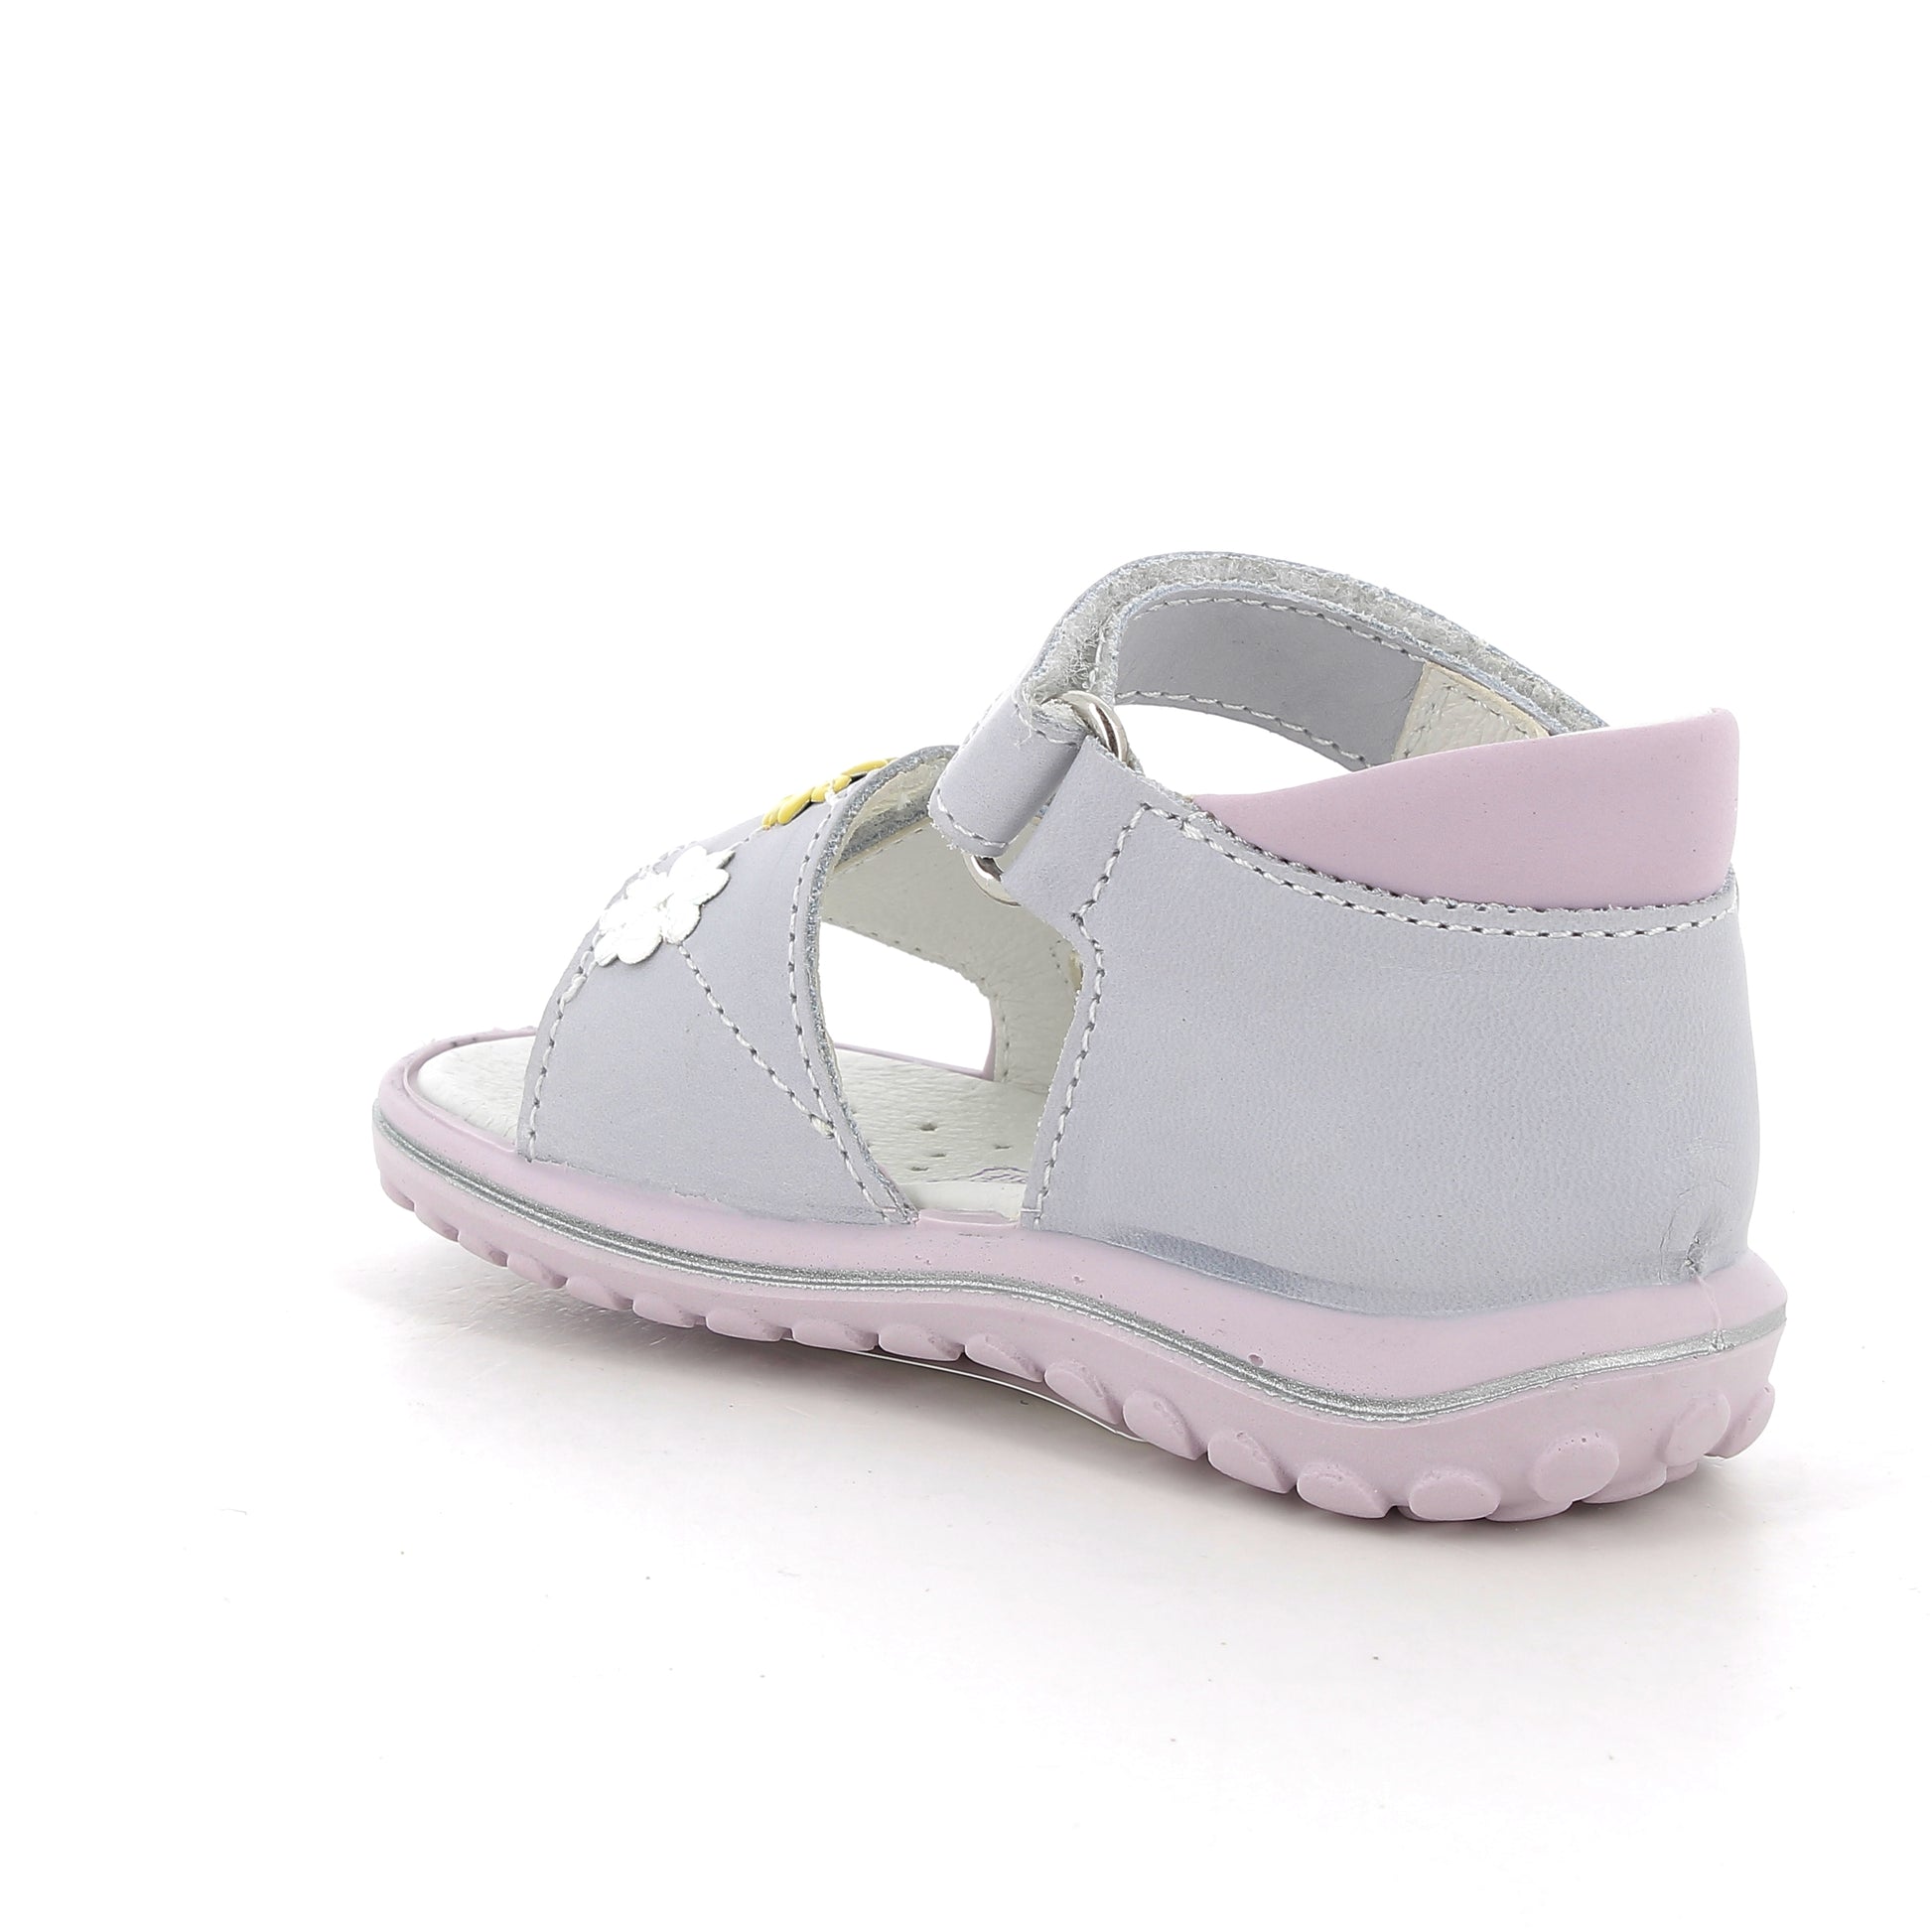 A girls sandal by Primigi, style Baby Sweet 586522, in grey leather with multi coloured flower trim. Angled view of left side.